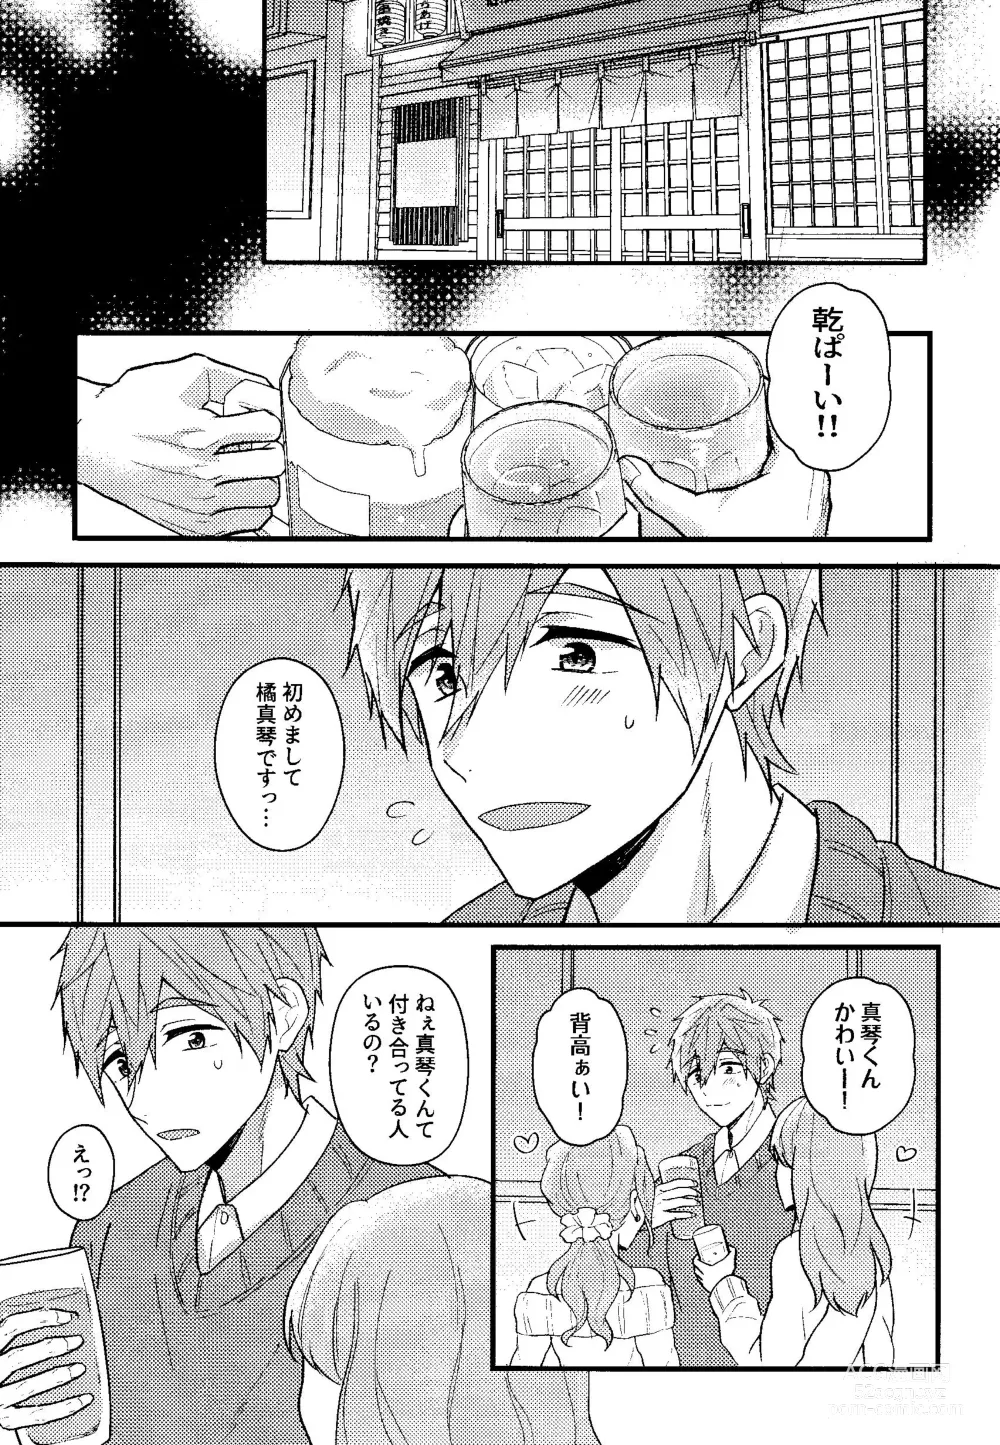 Page 5 of doujinshi My everything